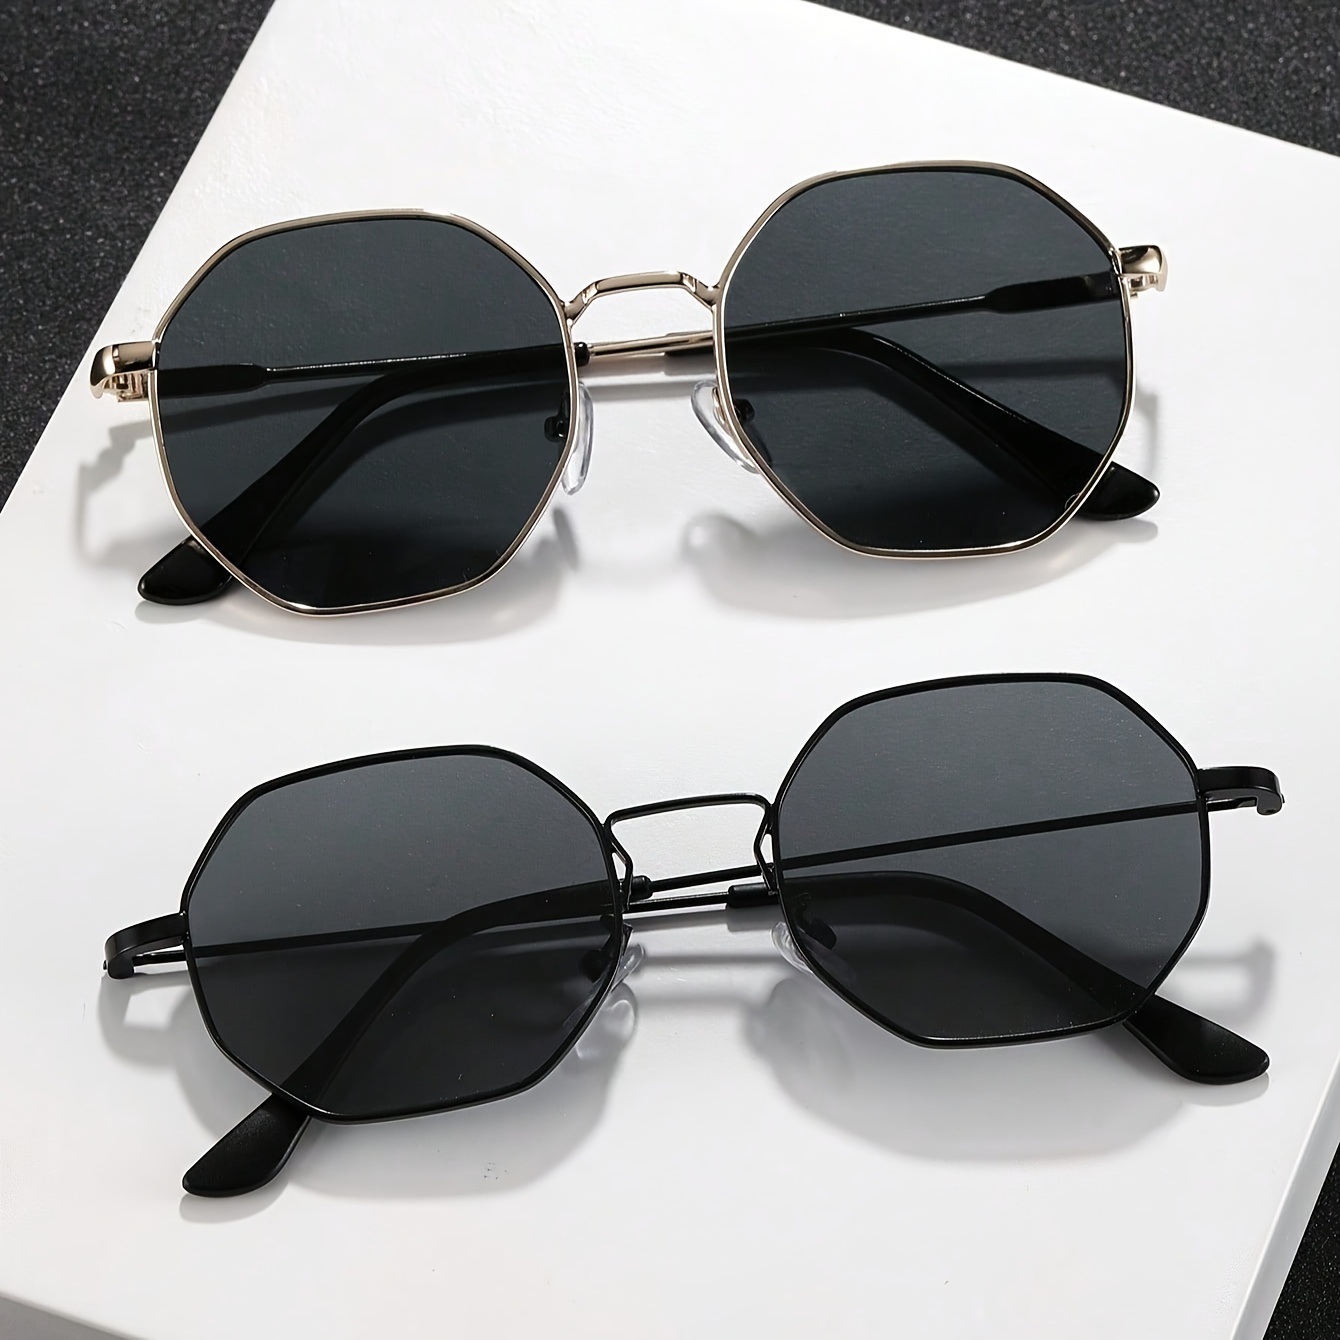 

2pcs Geometric Vintage Fashion Glasses For Men - Ideal For Outdoor Travel, Camping, And Street Snap Accessories